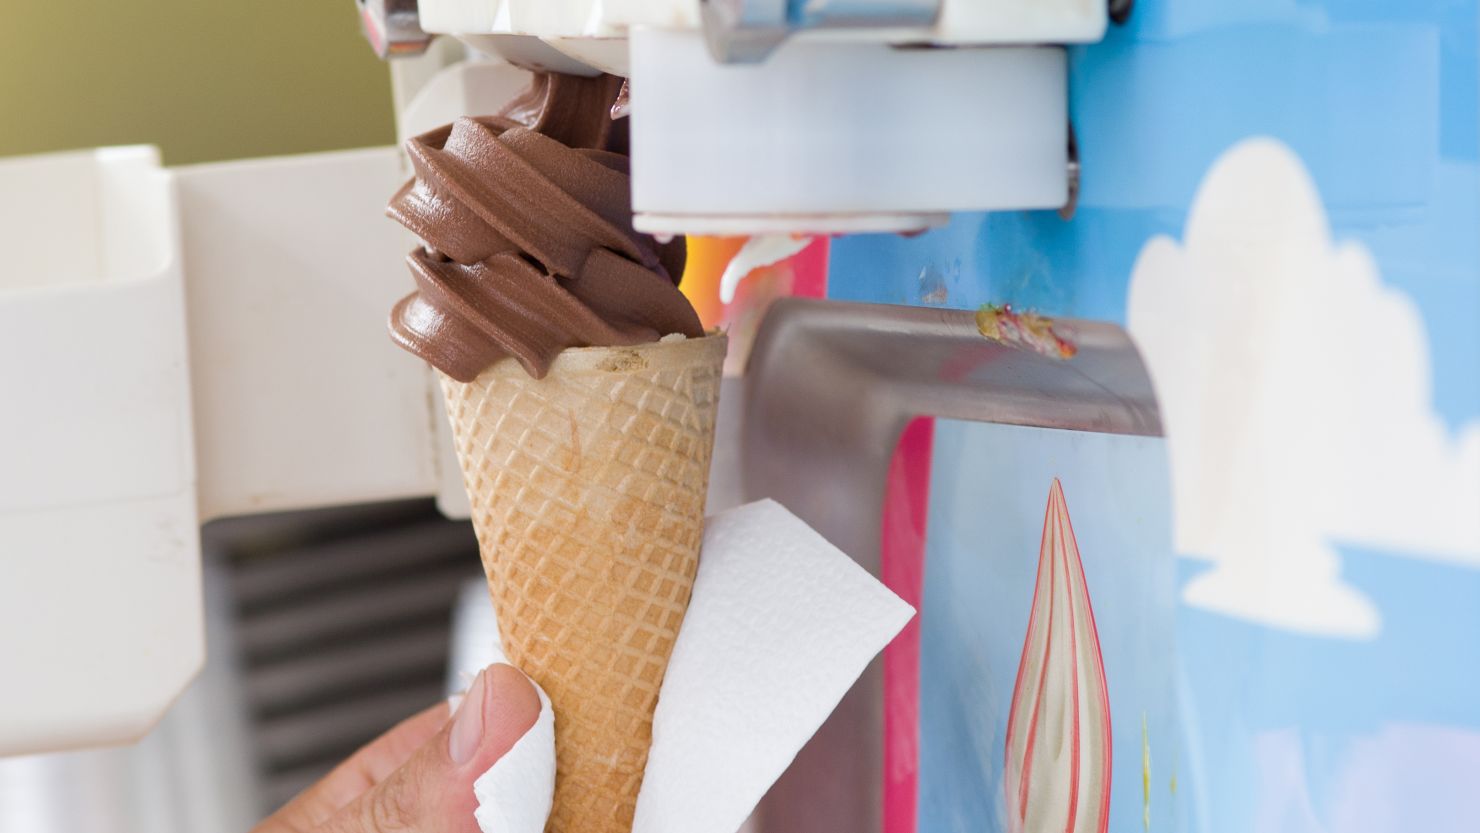 Who Needs a Regular Ice Cream Scoop When You Can Have a Giant One